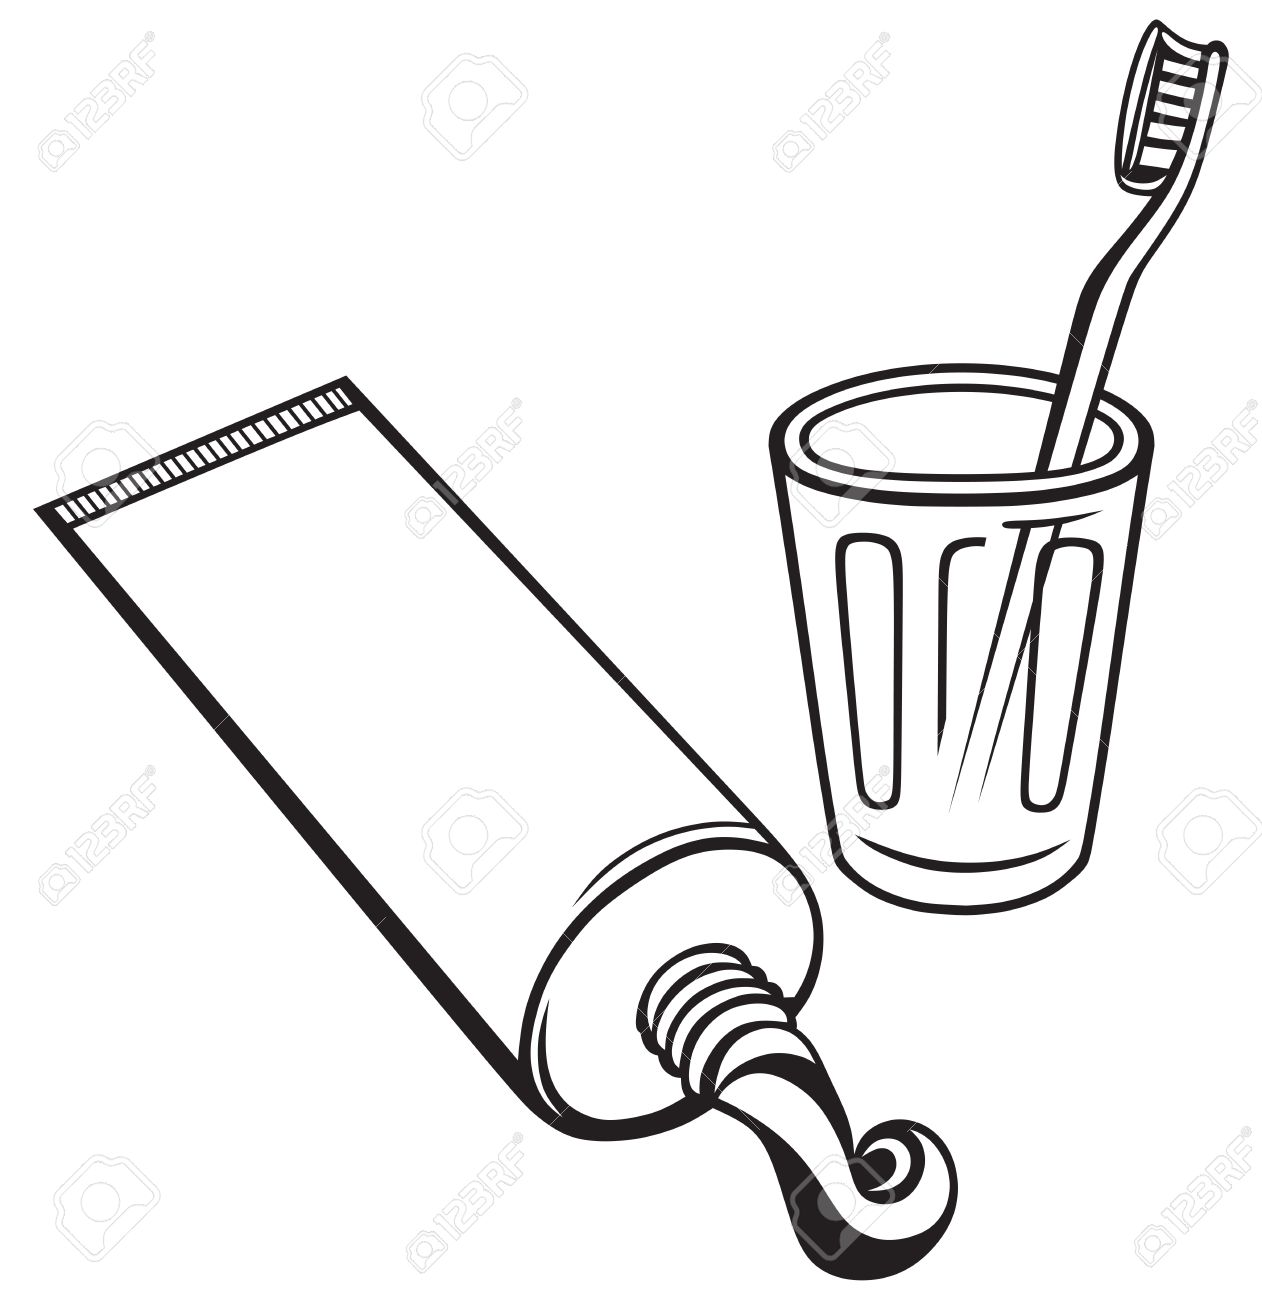 Toothpaste clipart black and white 10 » Clipart Station.